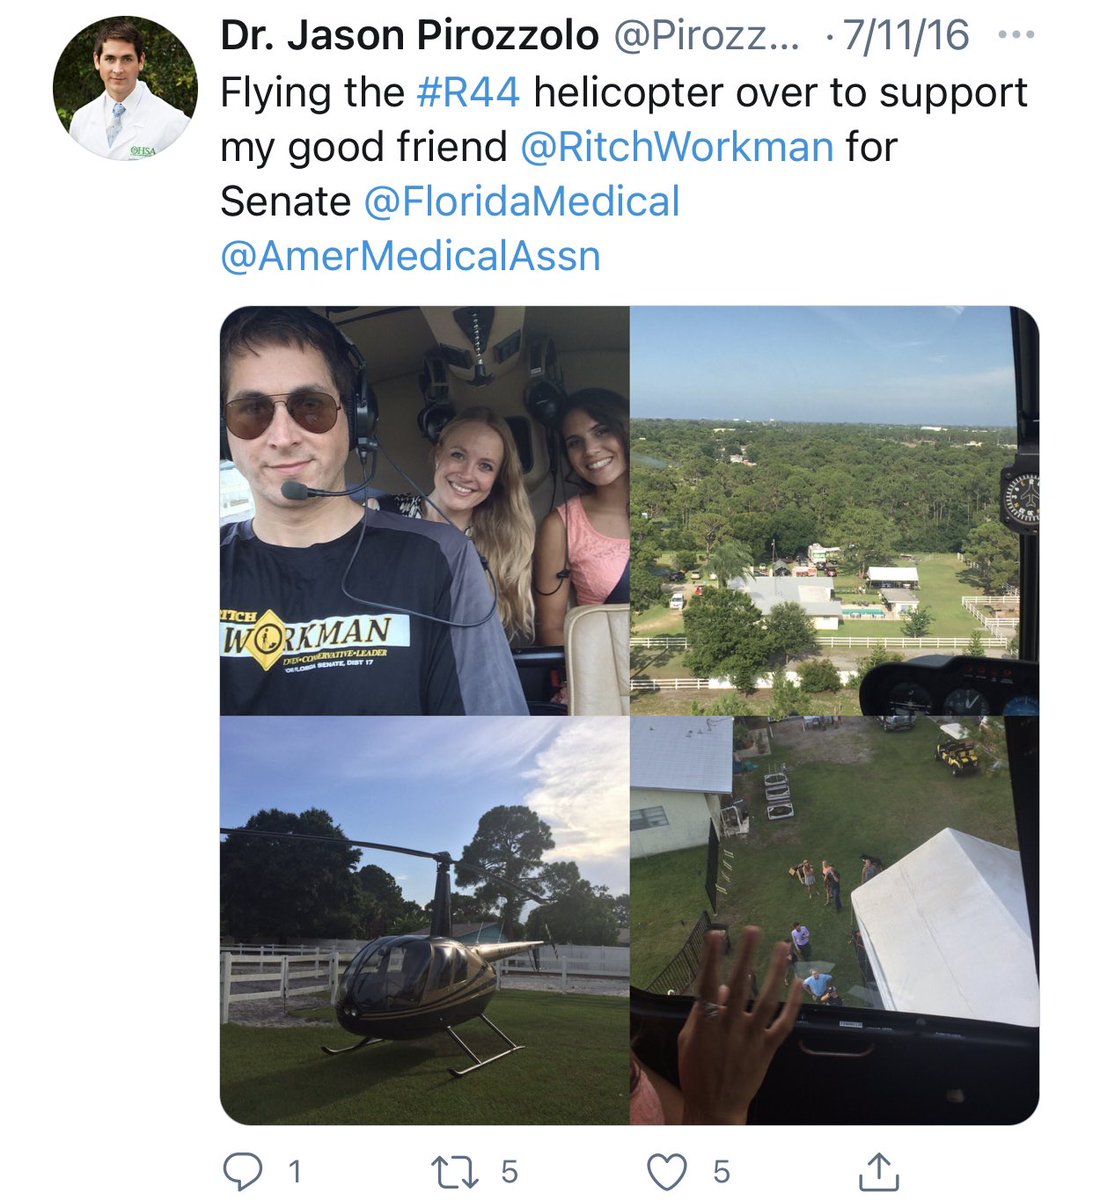 A 2016 photo reveals Jason Pirozzolo used a helicopter to promote the campaign of his “good friend” former Florida House Rep Ritch Workman.Savara Hastings and an unidentified woman are in the back seat of the helicopter.